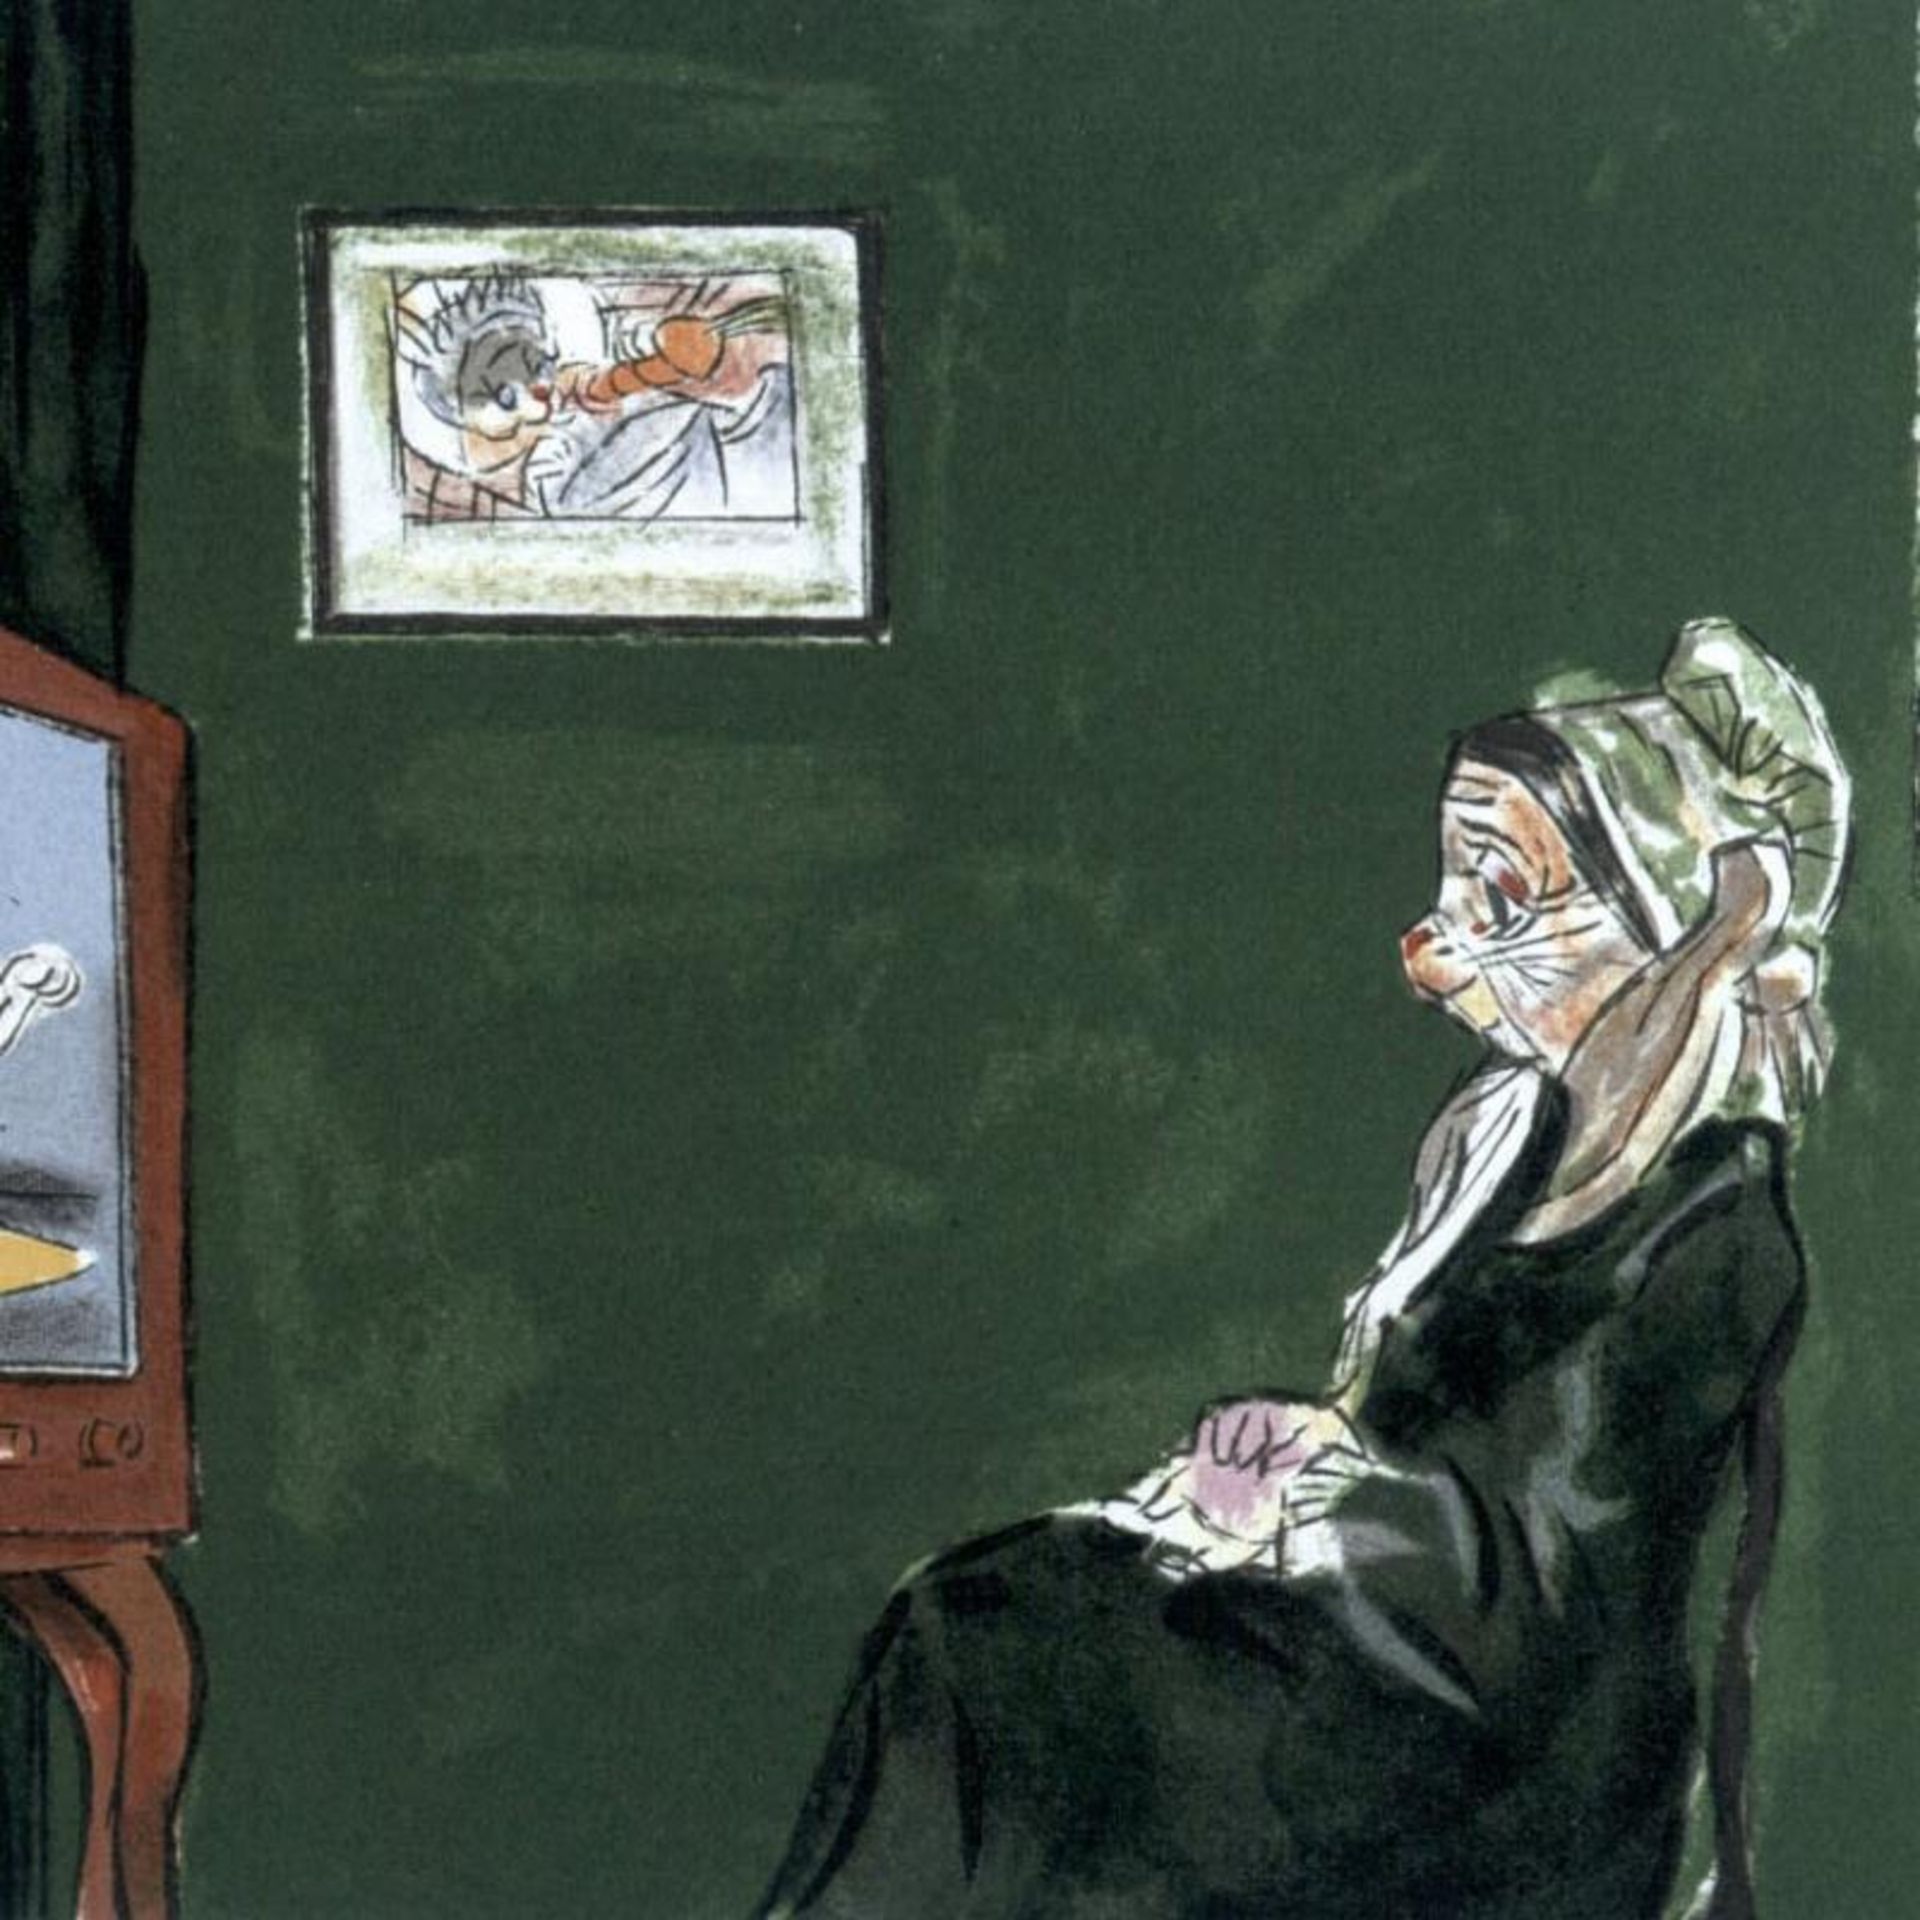 Whiskers Mother by Chuck Jones (1912-2002) - Image 2 of 2